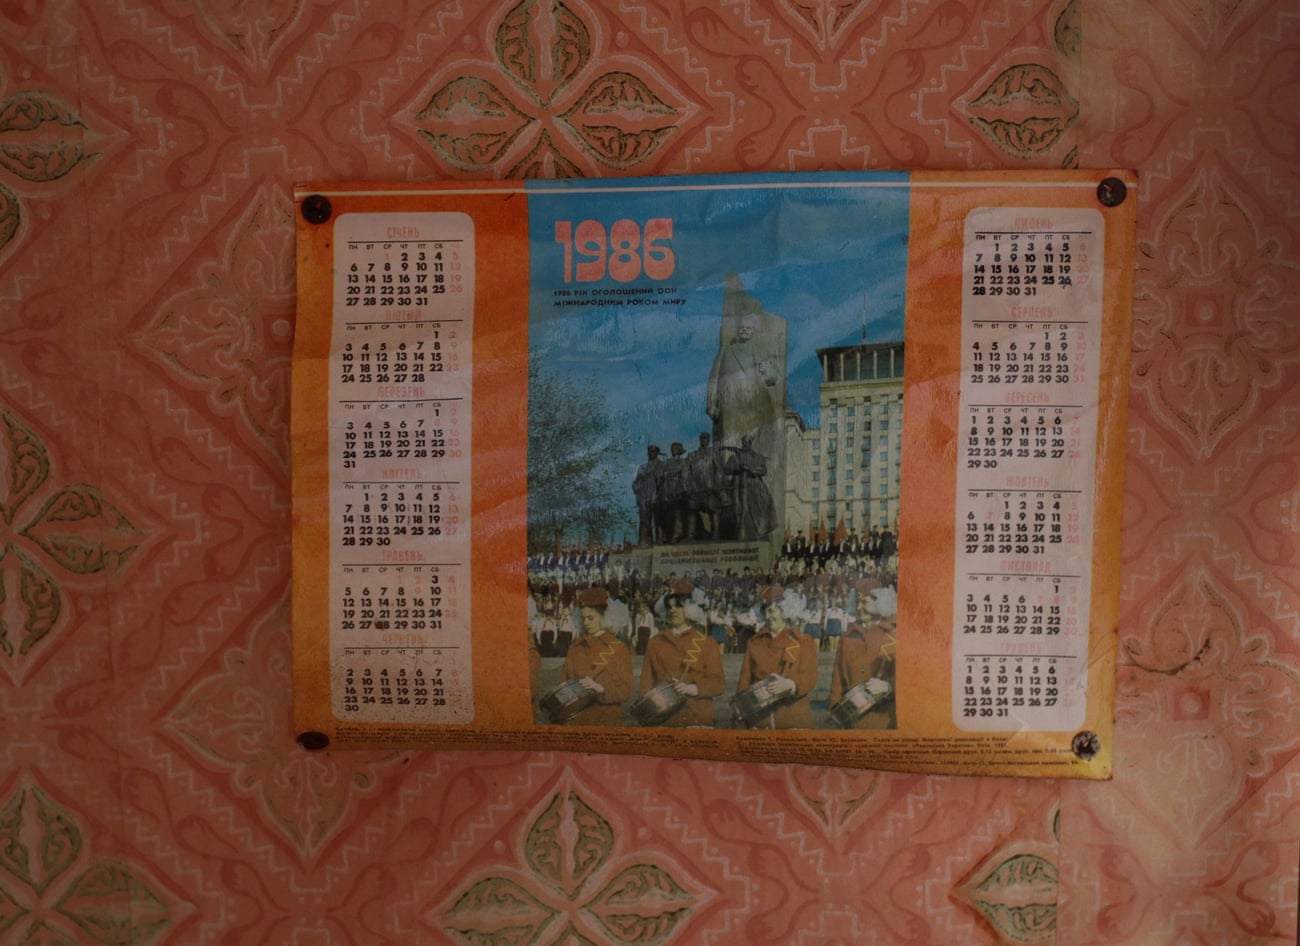 A calendar on the wall in a house in the abandoned village of Zalissya.